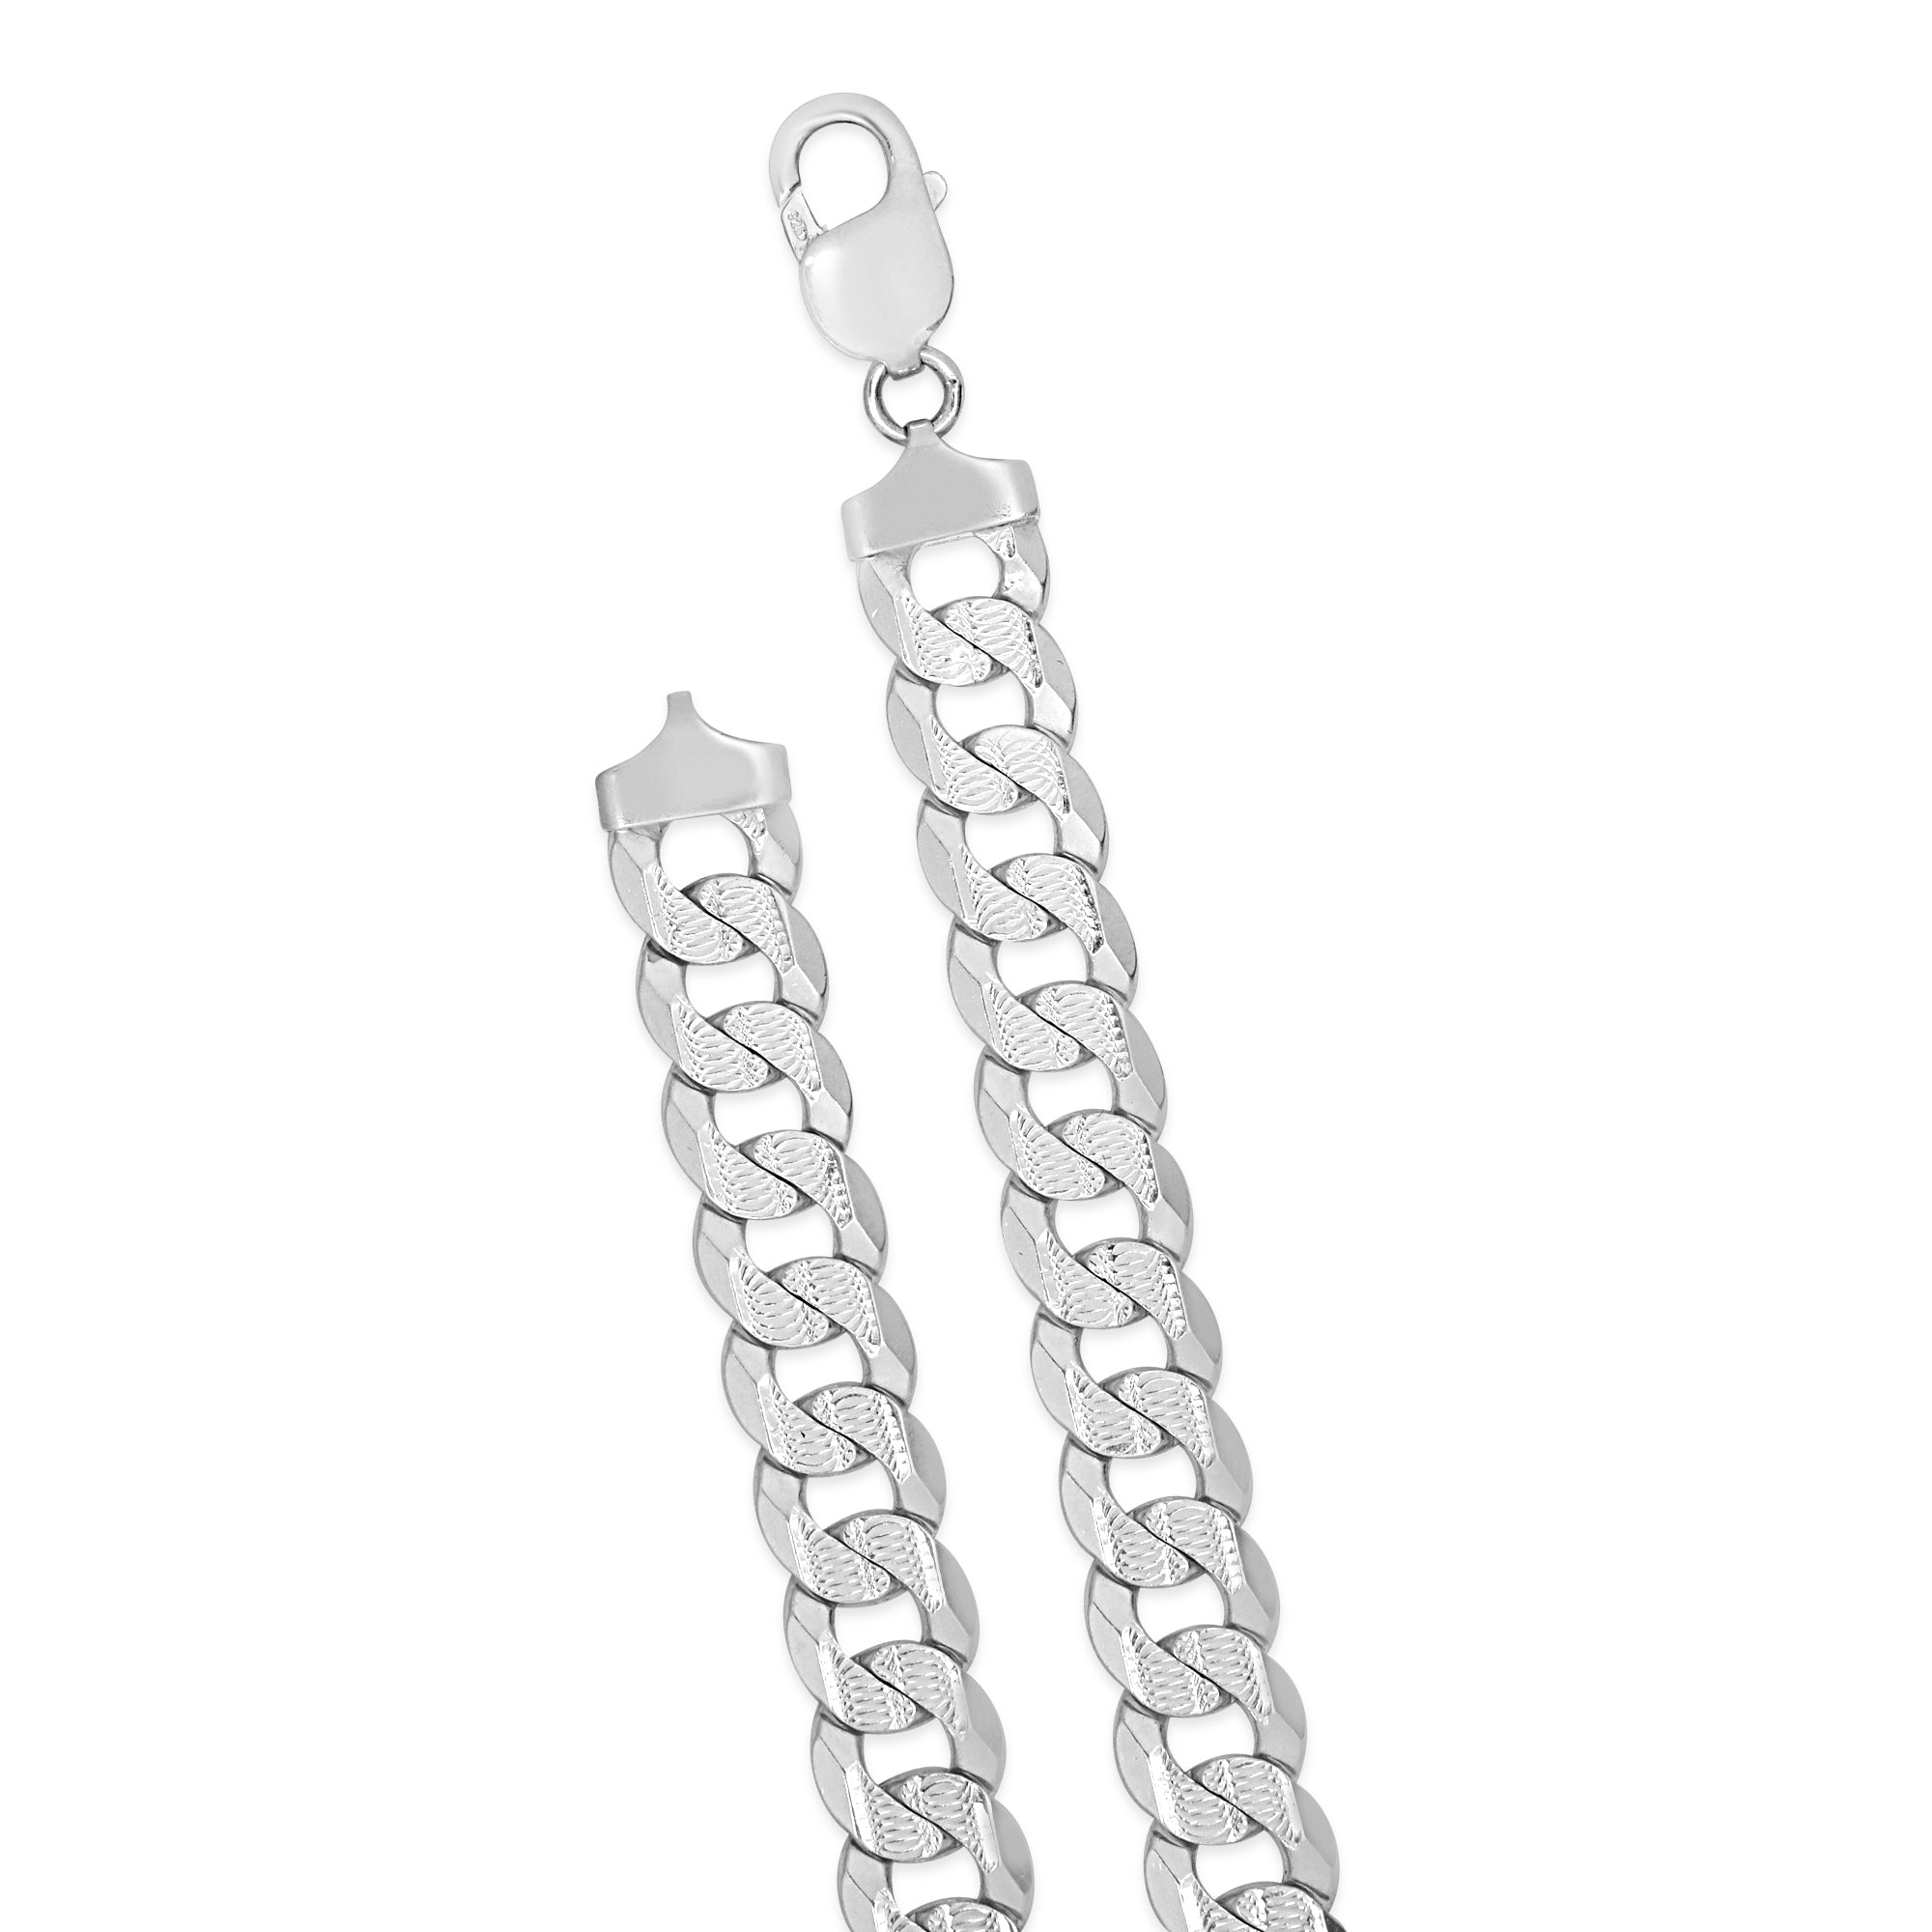 Sleek Rhodium-Plated Linked Chain 925 Sterling Silver Men's Chain